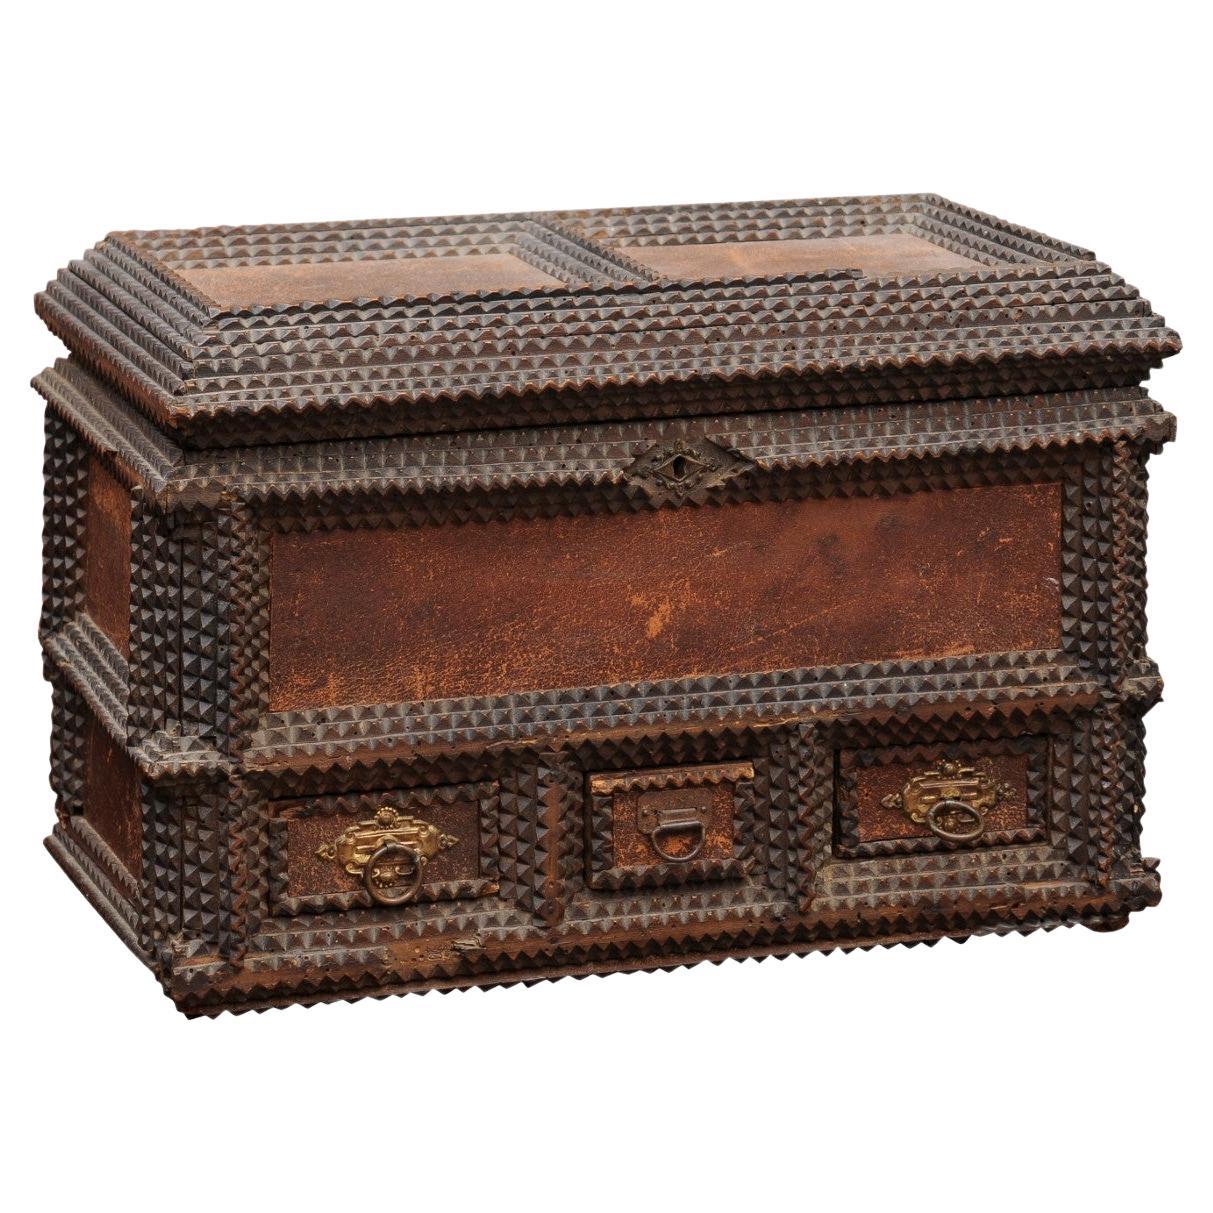 Tramp Art Dresser Box with Leather Panels, Signed ca. 1900